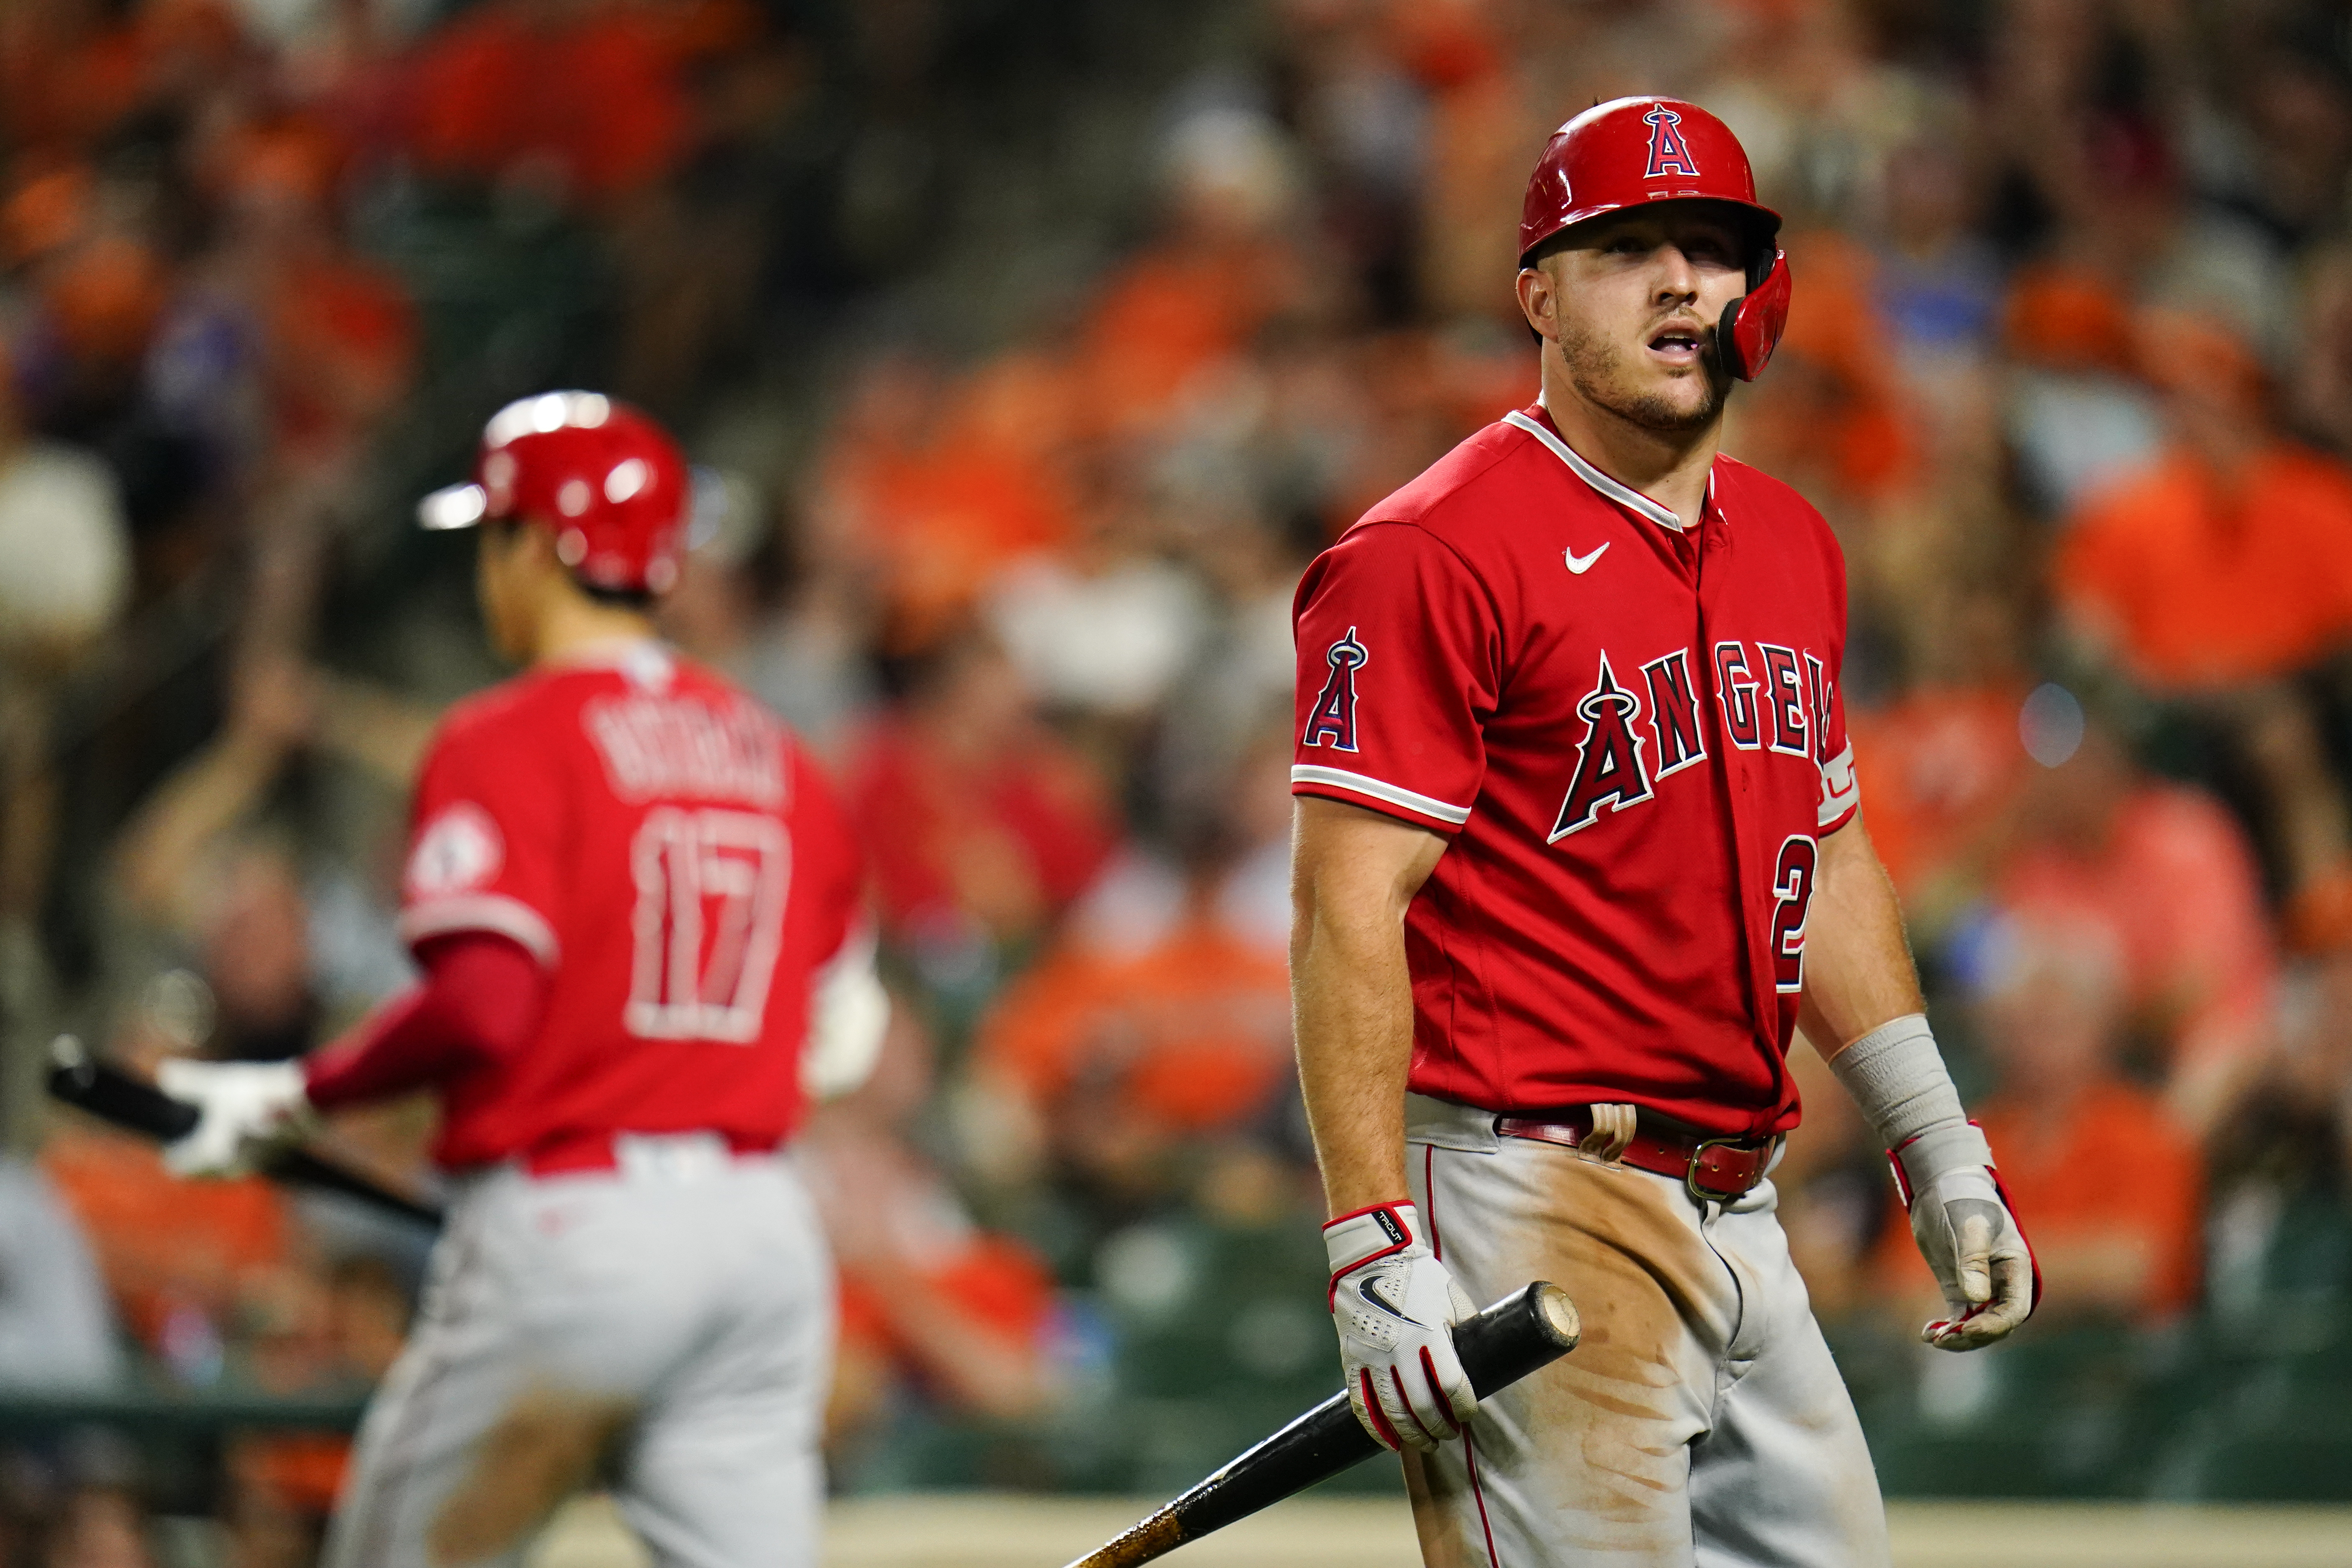 Shohei Ohtani, Mike Trout named 2022 All-Star Game starters